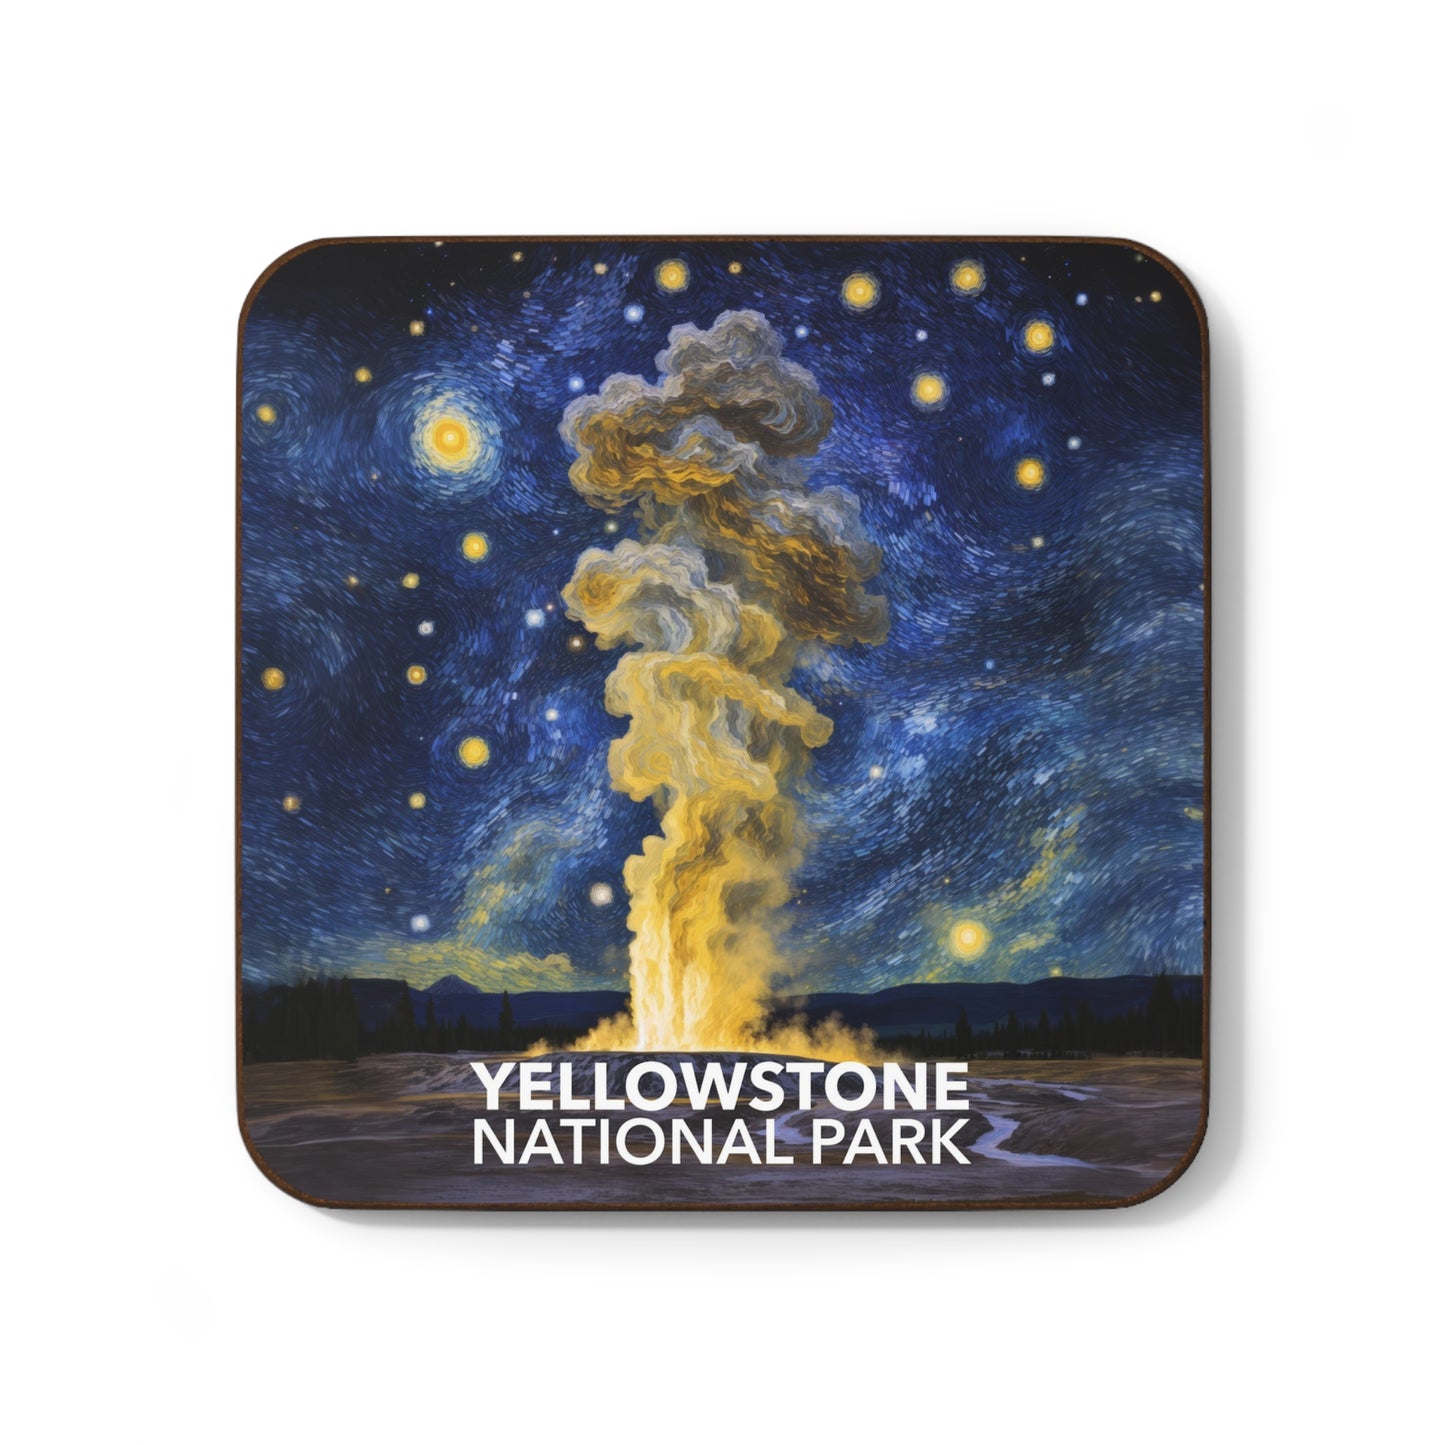 Yellowstone National Park Coaster - The Starry Night